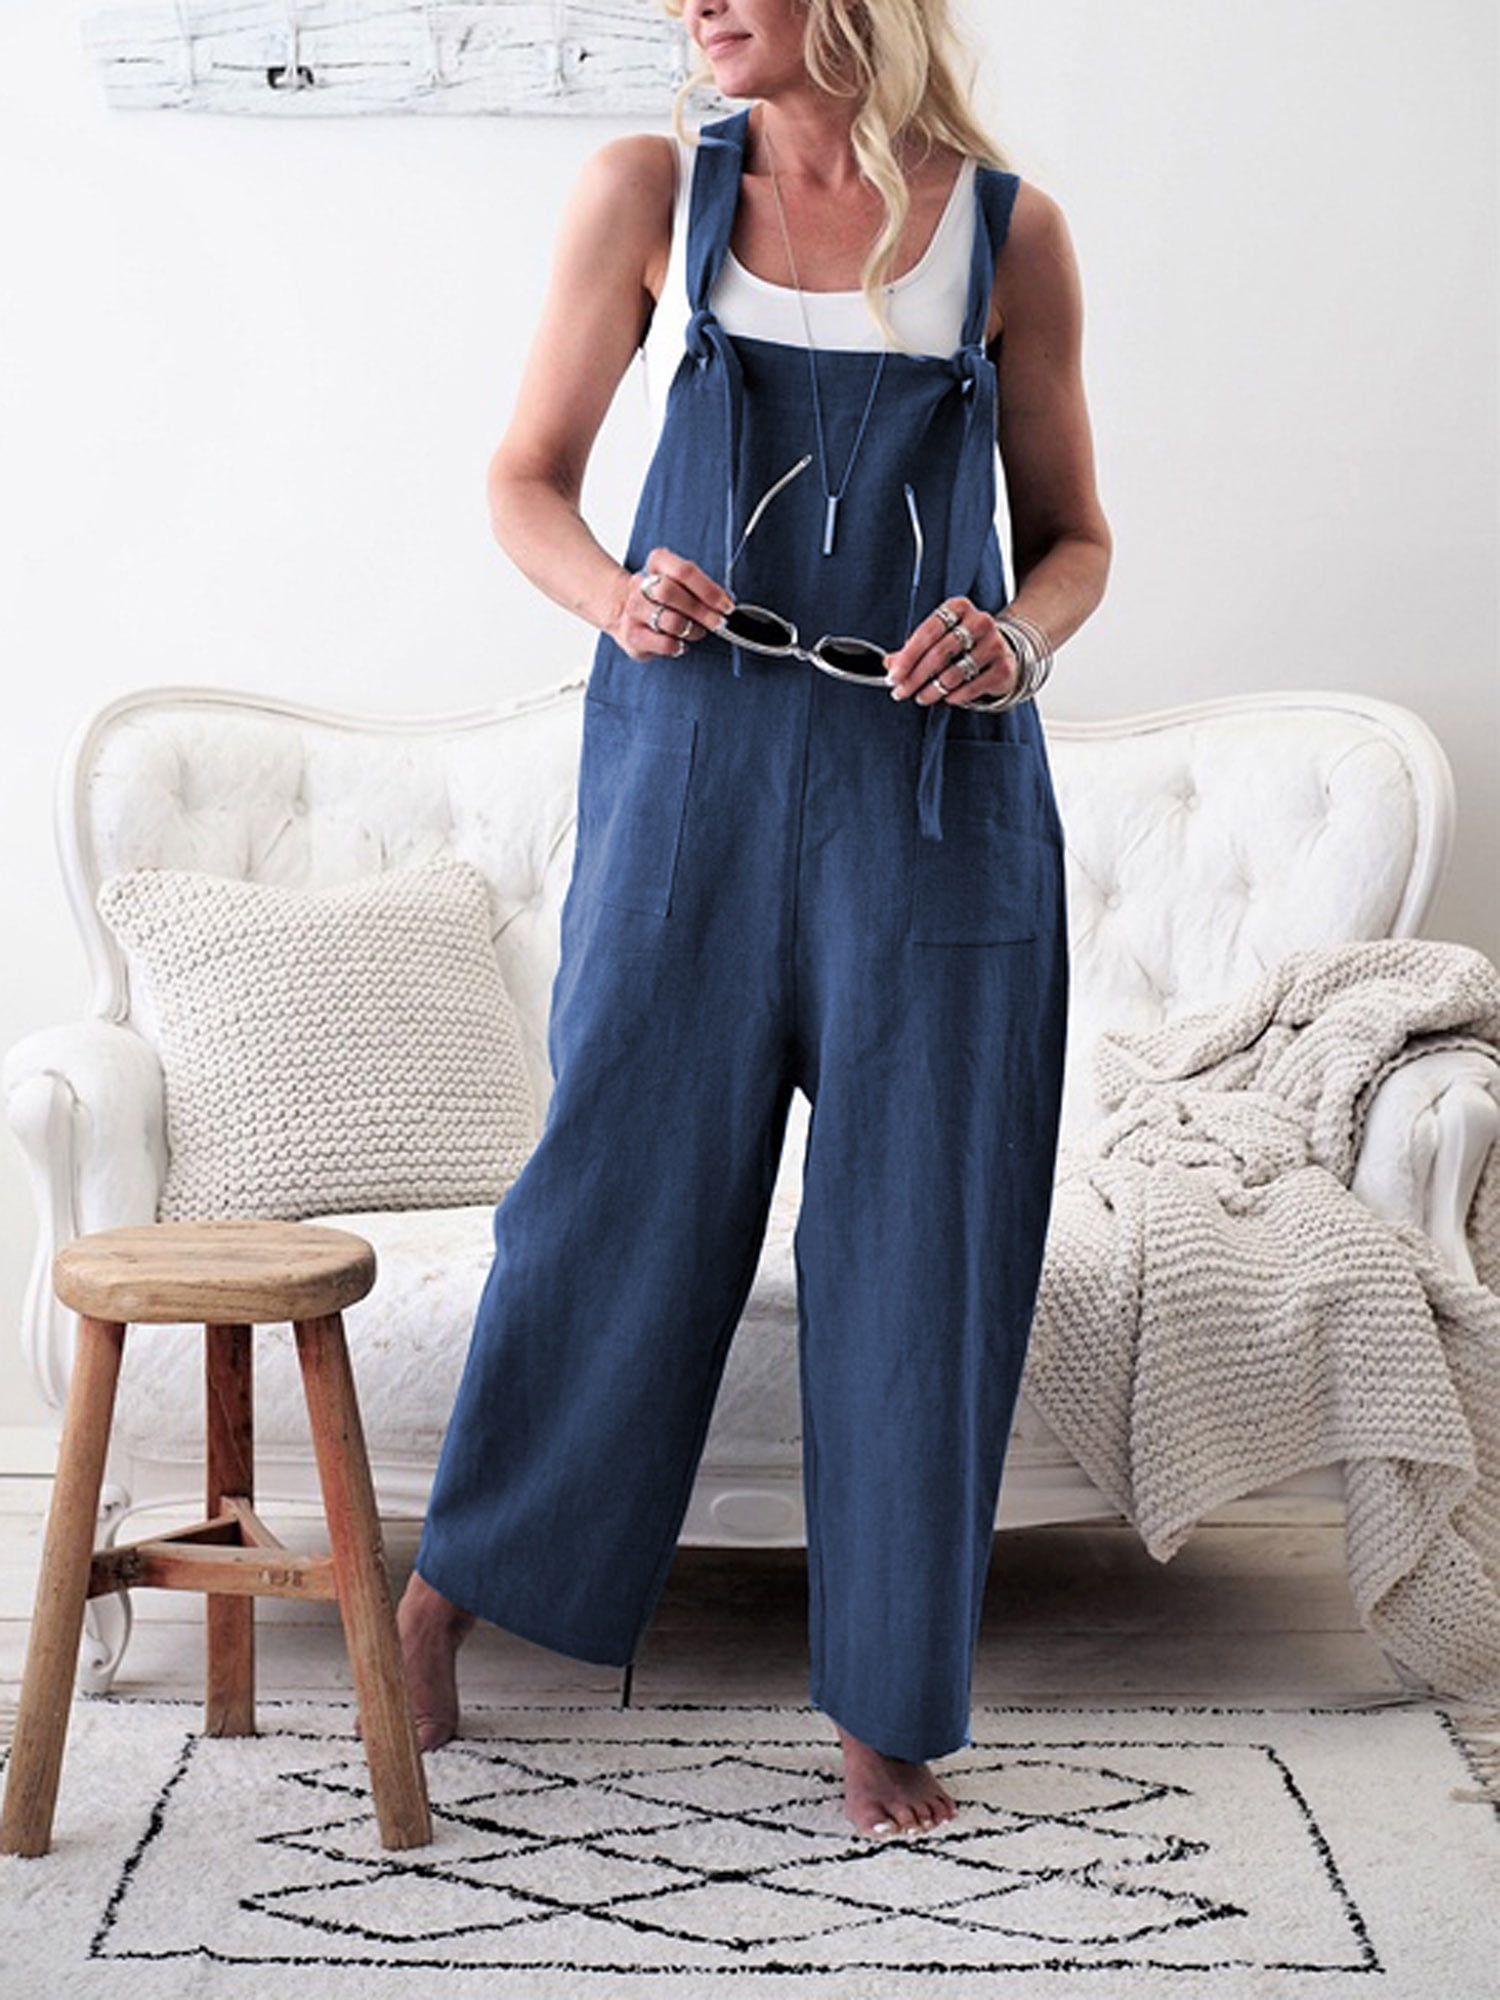 AMILIEe Women Casual Overalls Jumpsuit Bib Trousers Linen